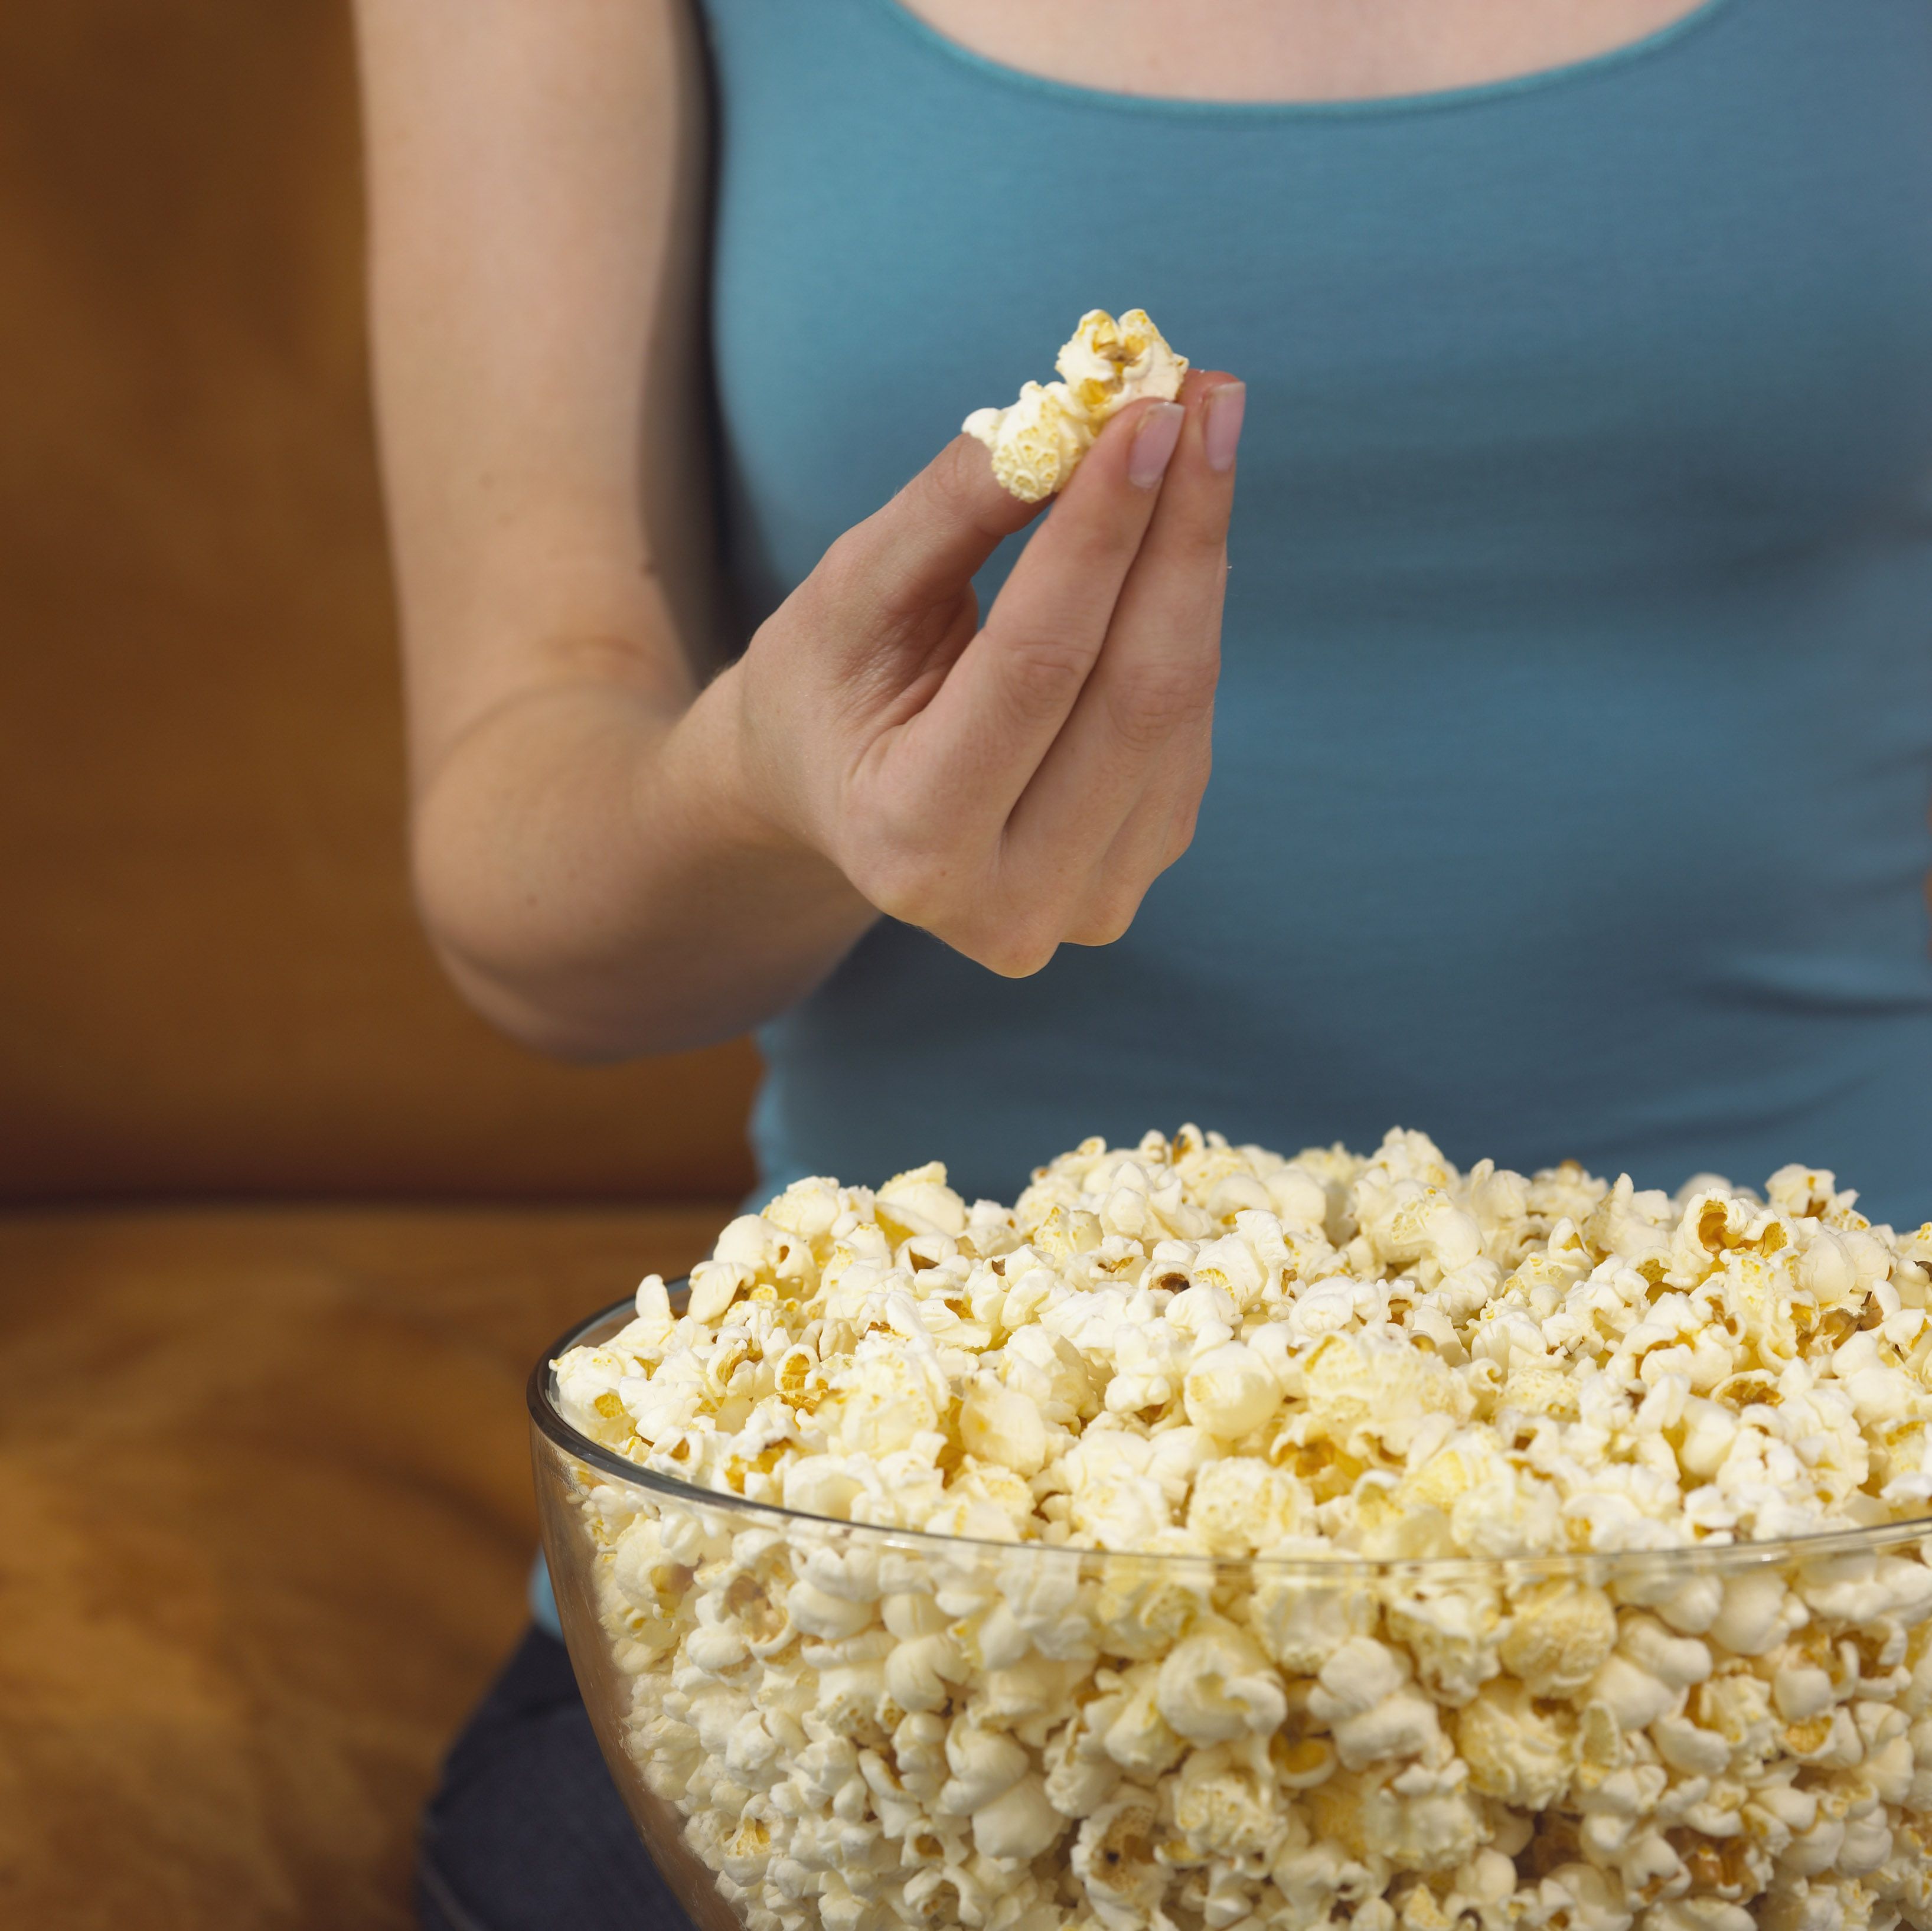 Grab the popcorn! Take your home entertainment to the next level